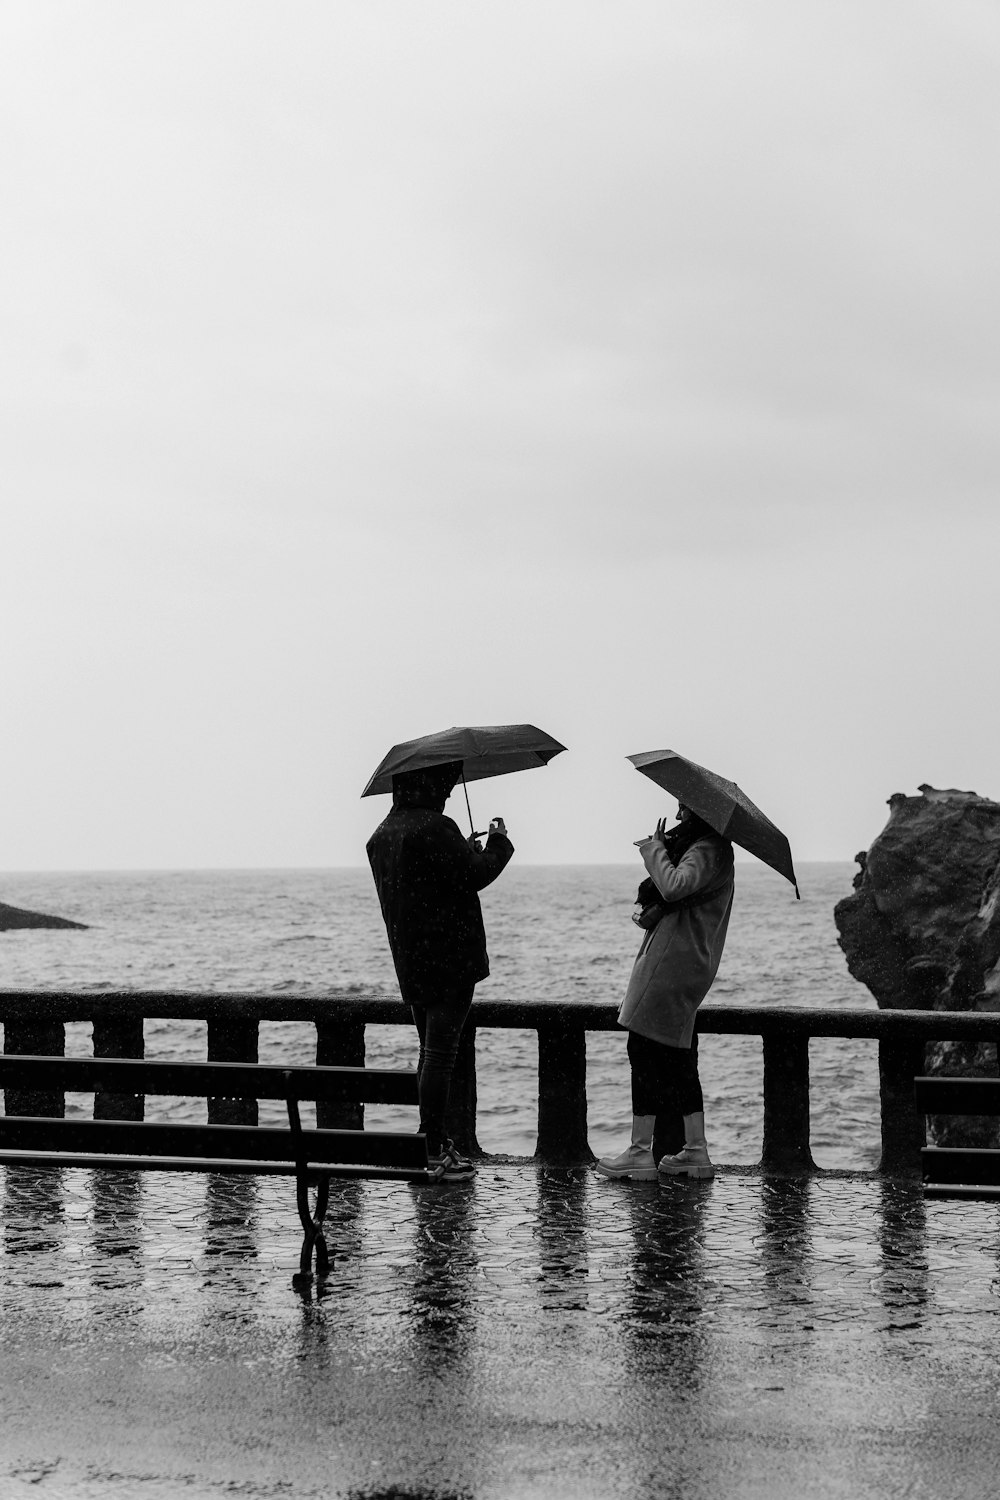 a couple of people standing on a pier holding umbrellas